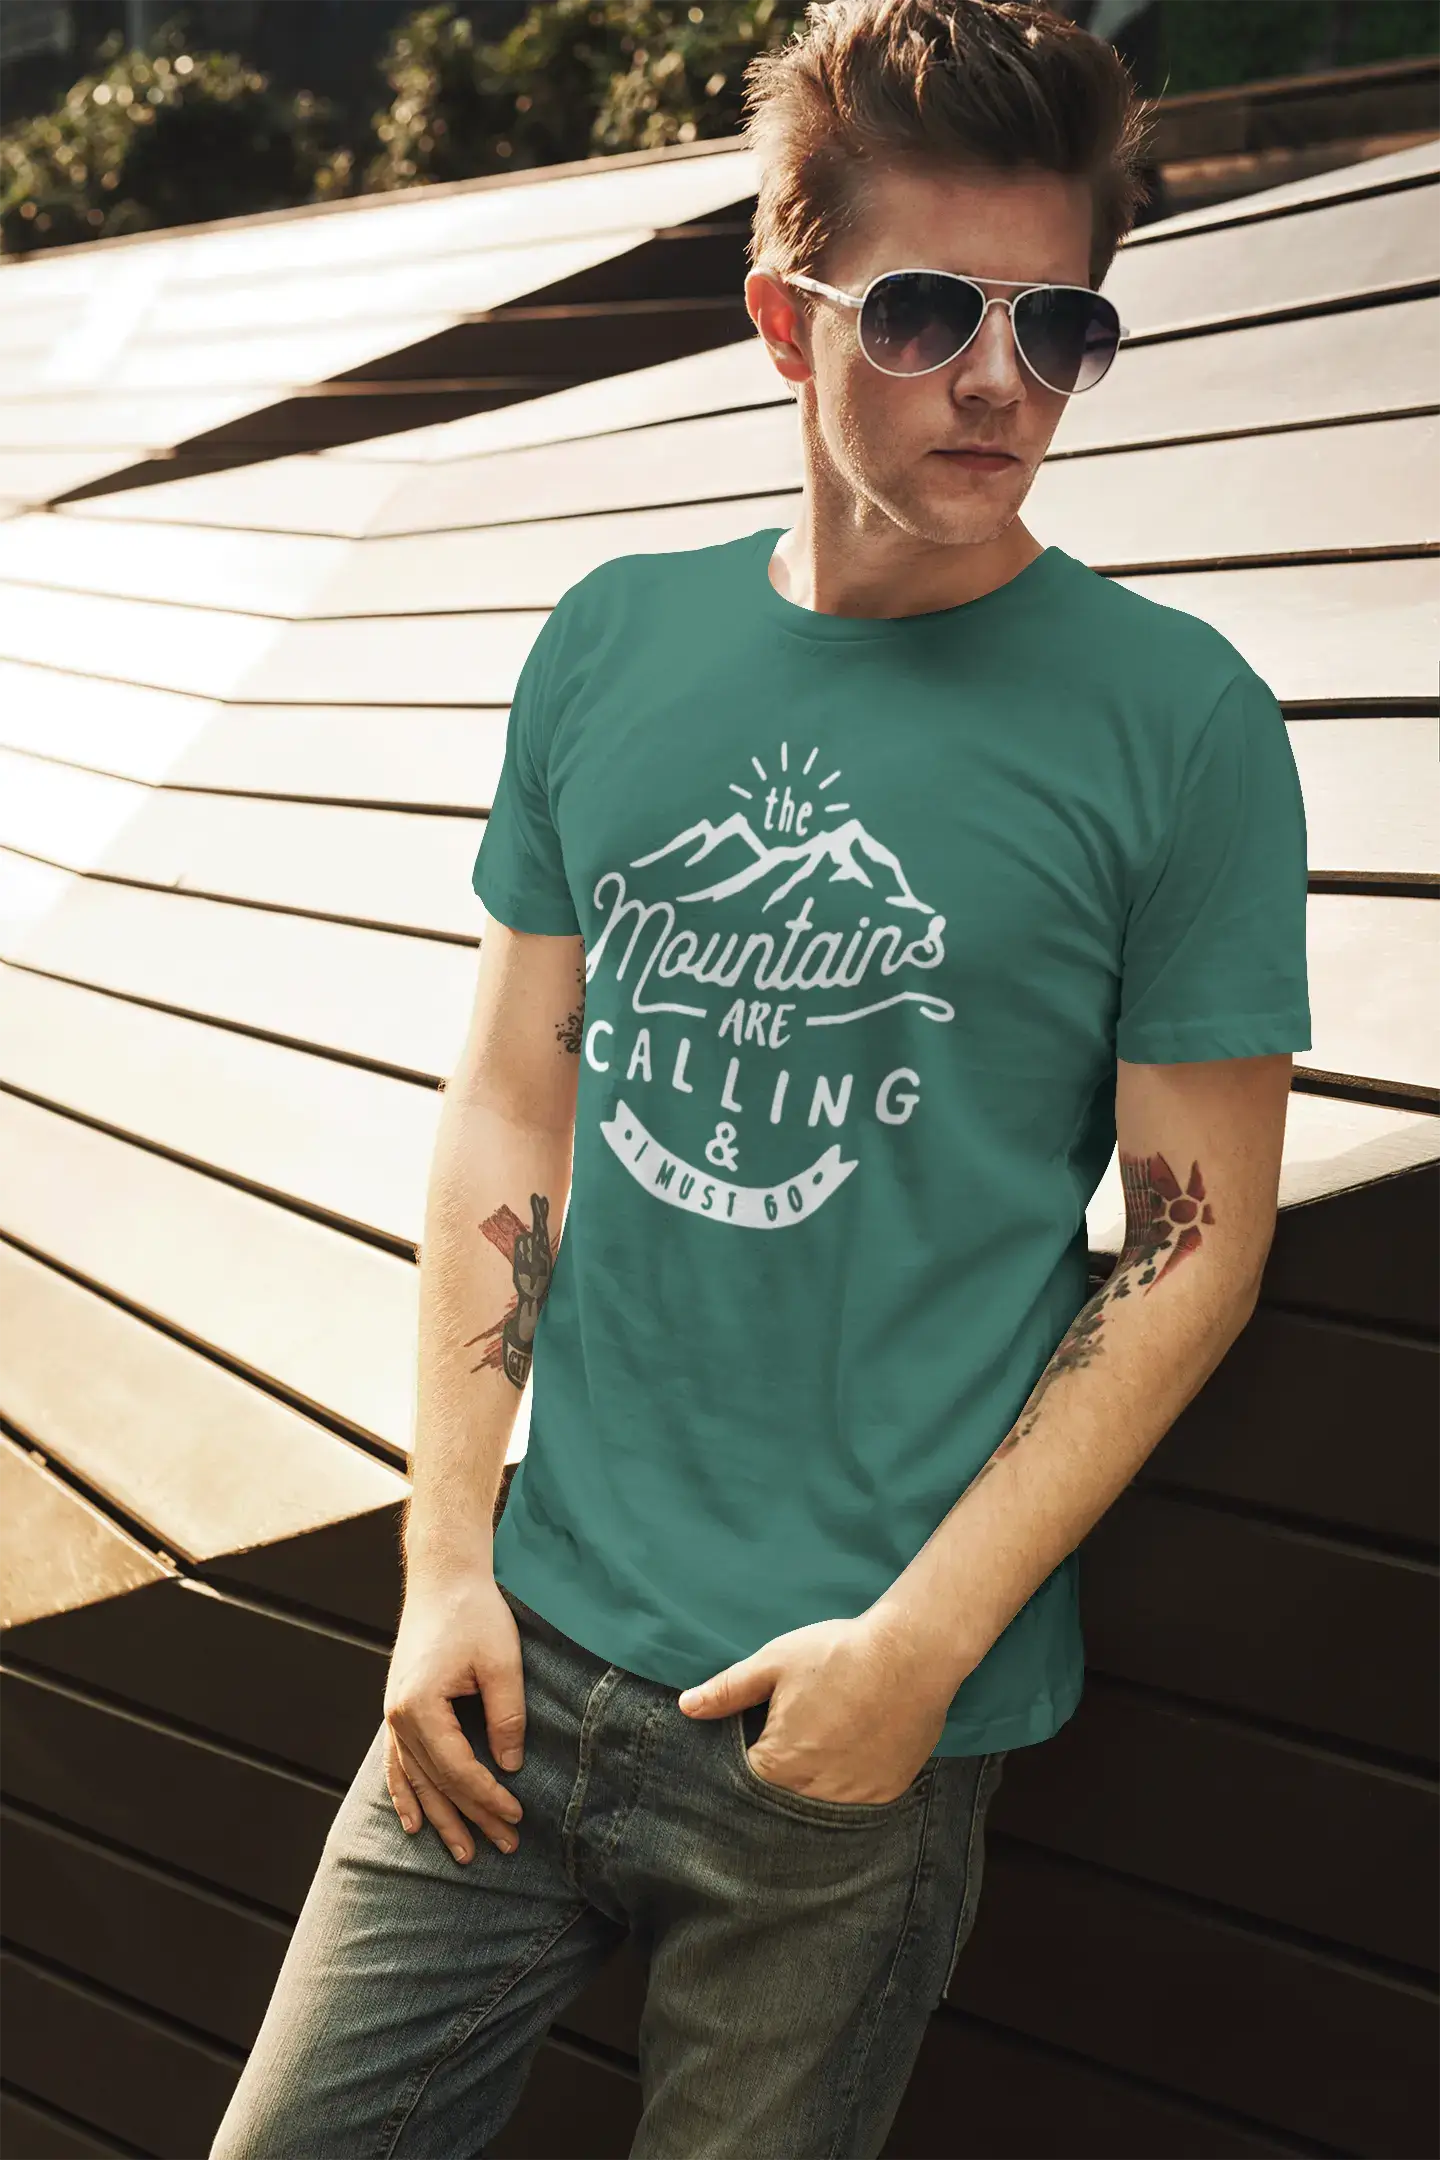 ULTRABASIC - Graphic Printed Men's The Mountains Are Calling And I Must Go Hiking Tee Dark Purple